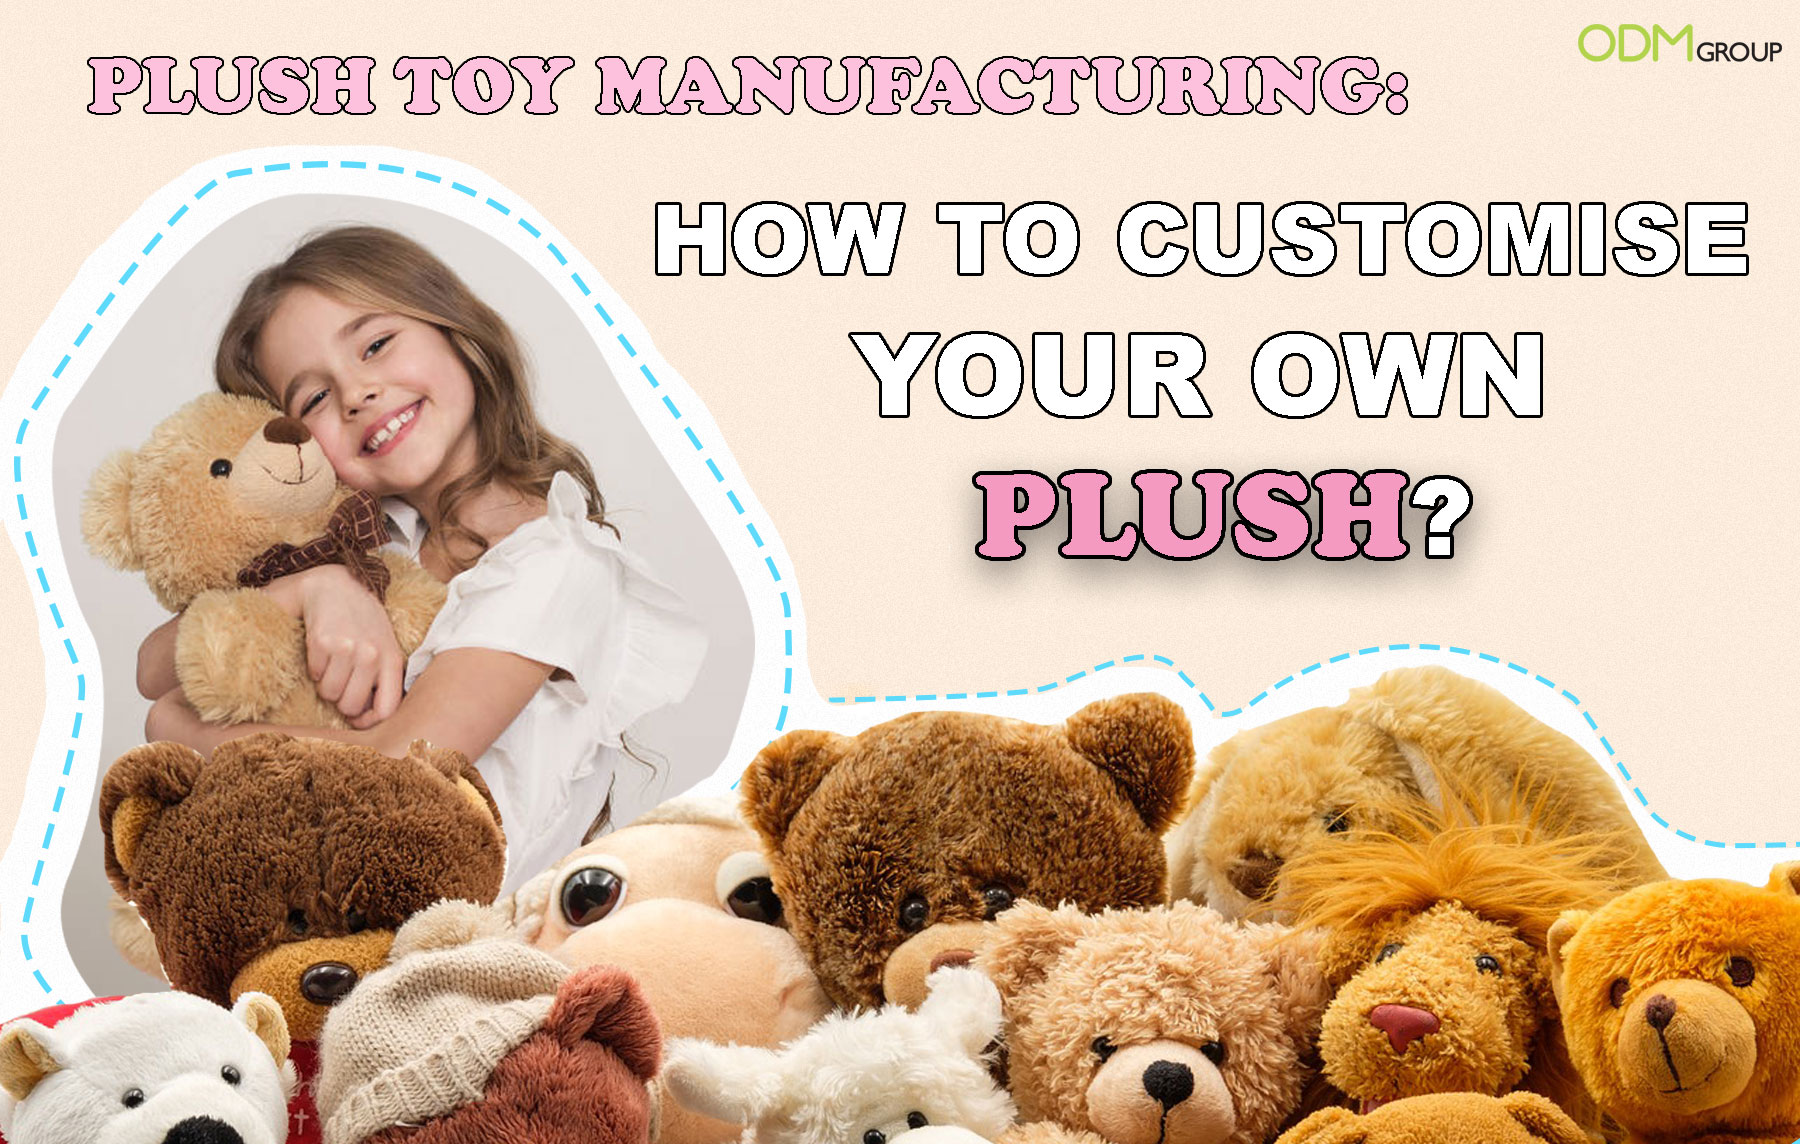 A Comprehensive Guide to Choosing Toy Stuffing for Teddy Bears